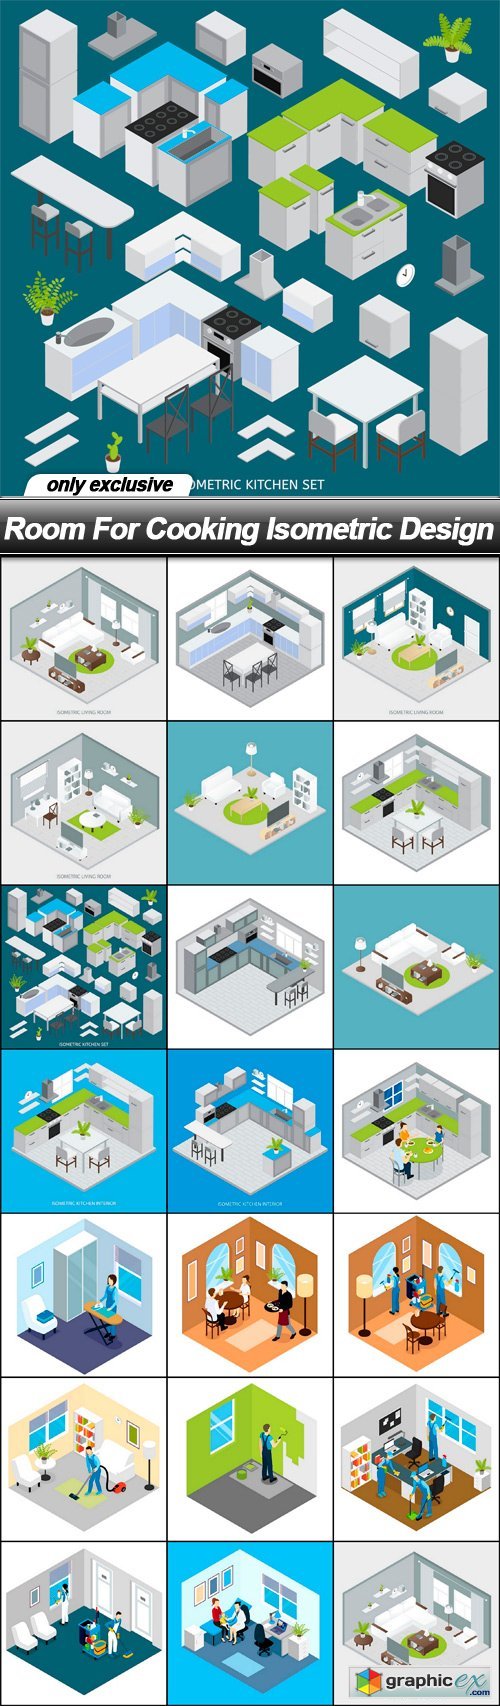 Room For Cooking Isometric Design - 20 EPS